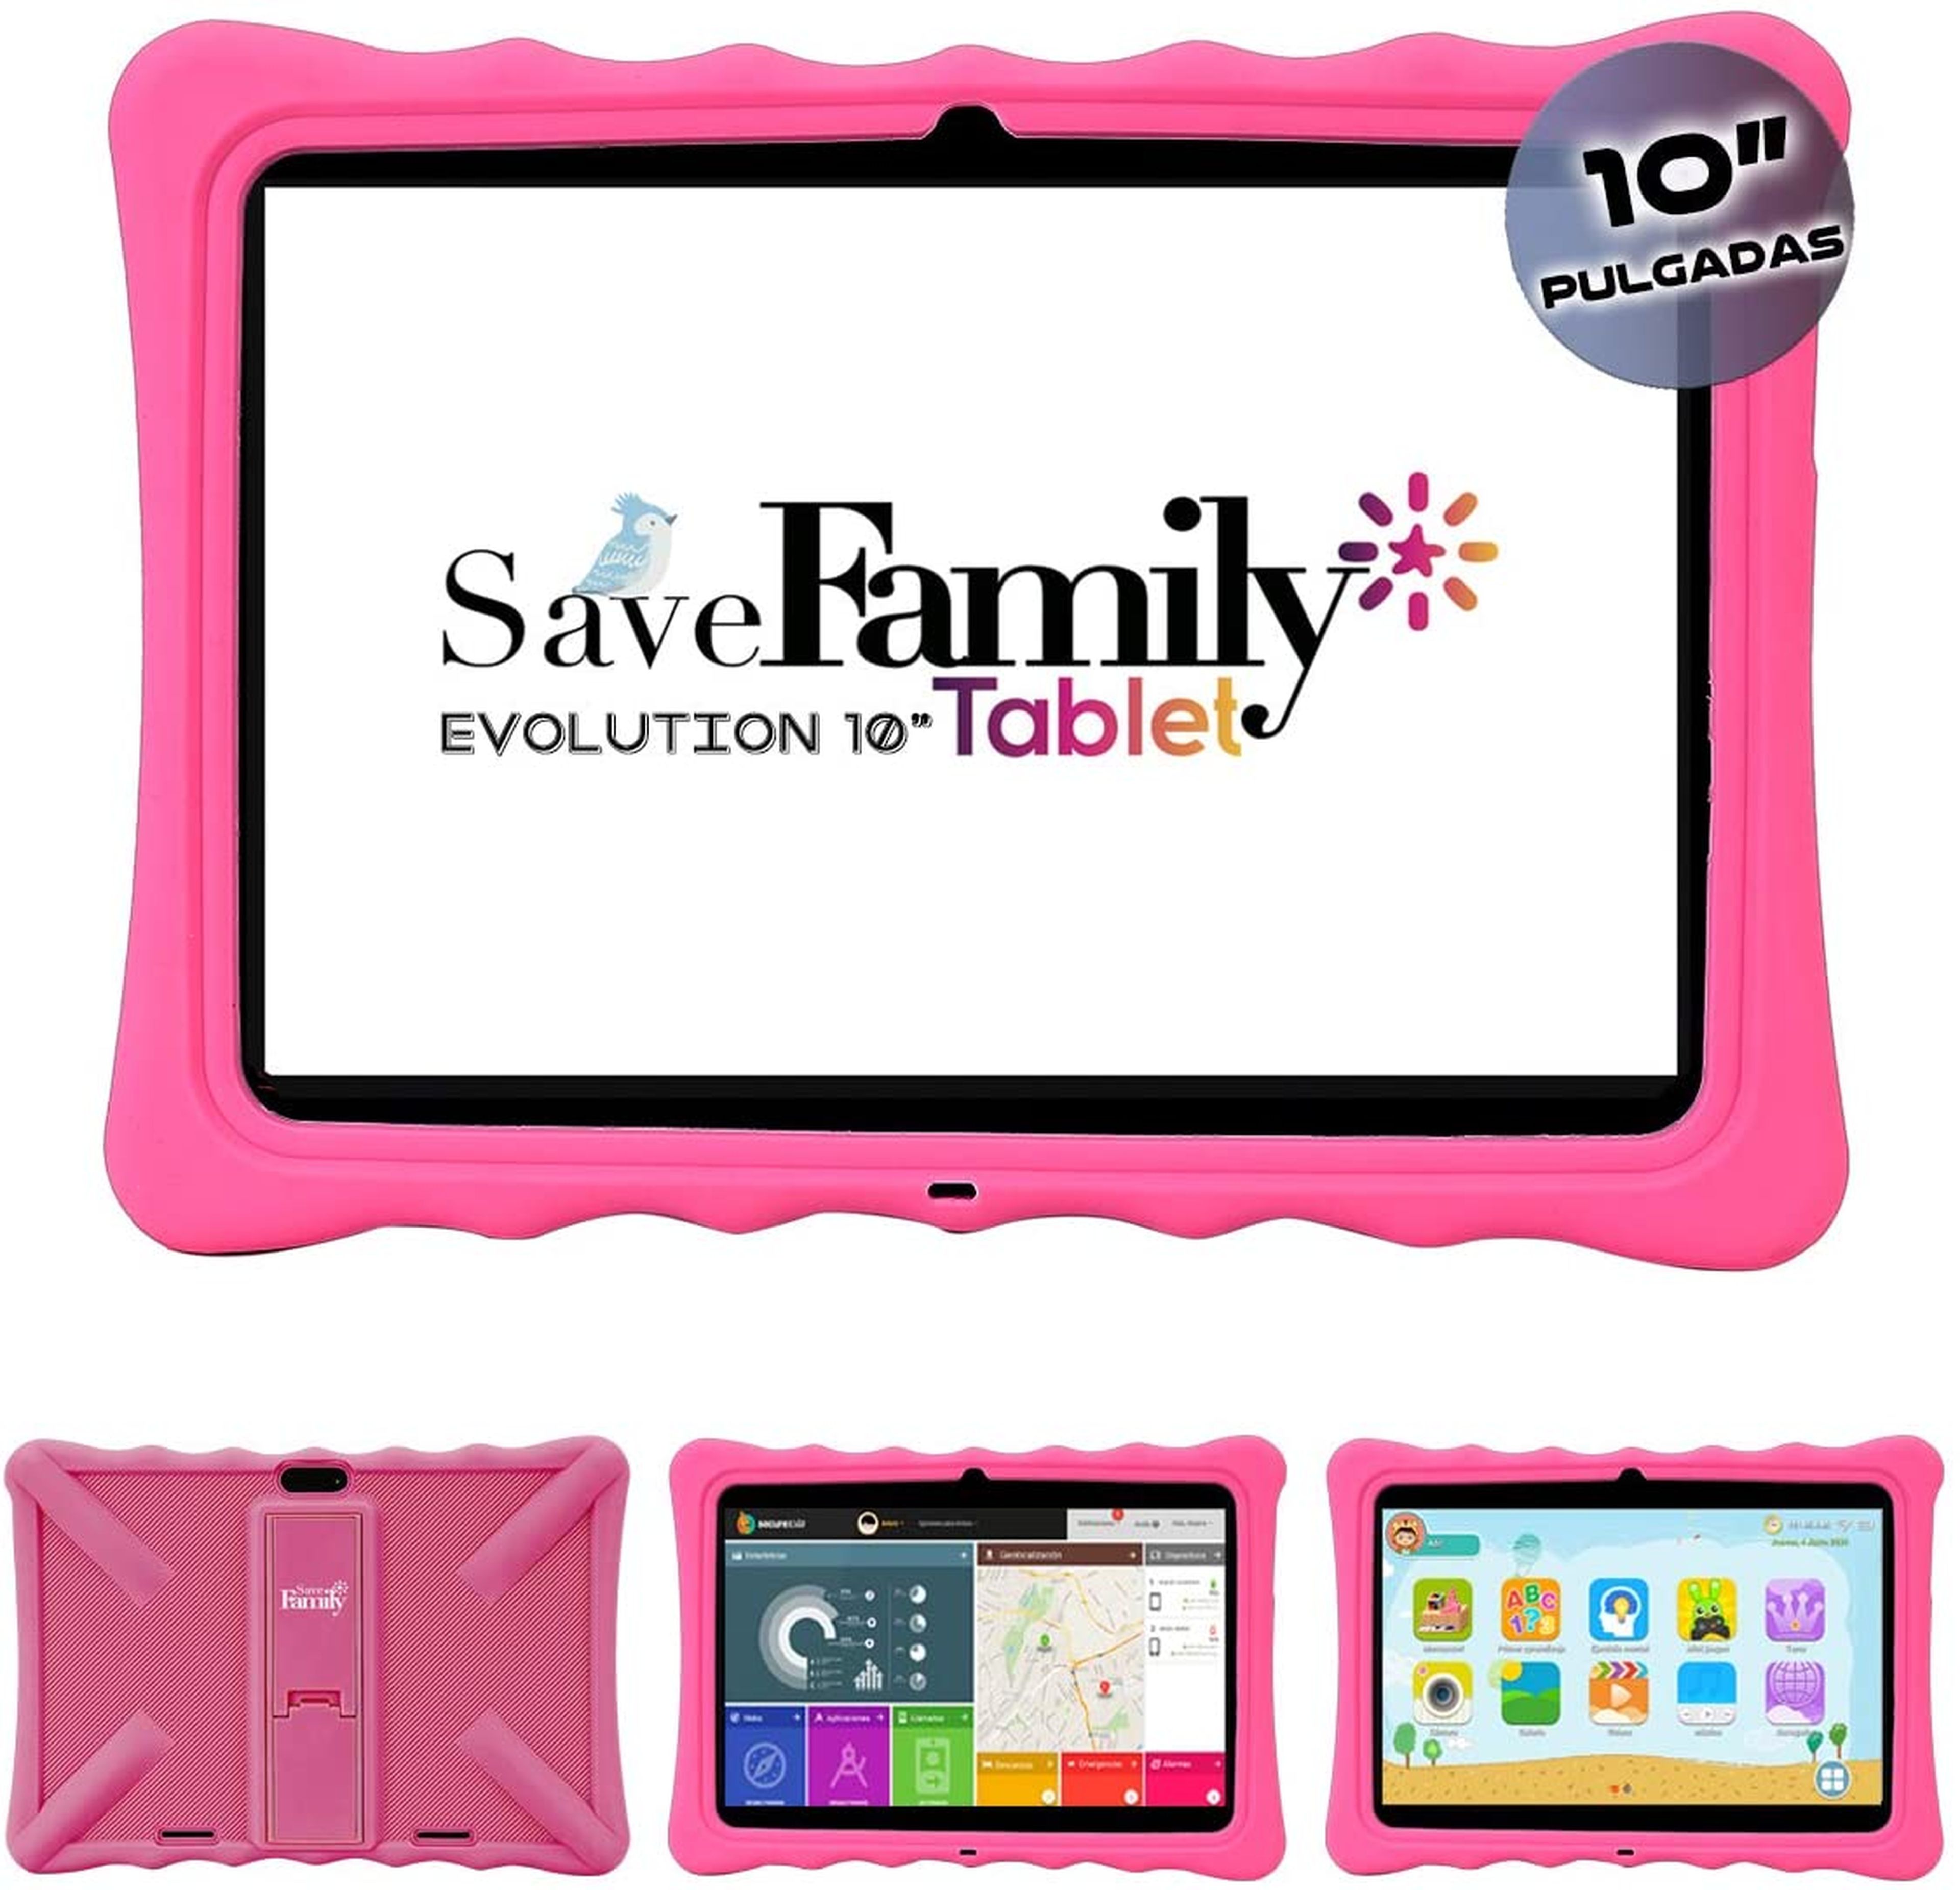 Tablet Save Family